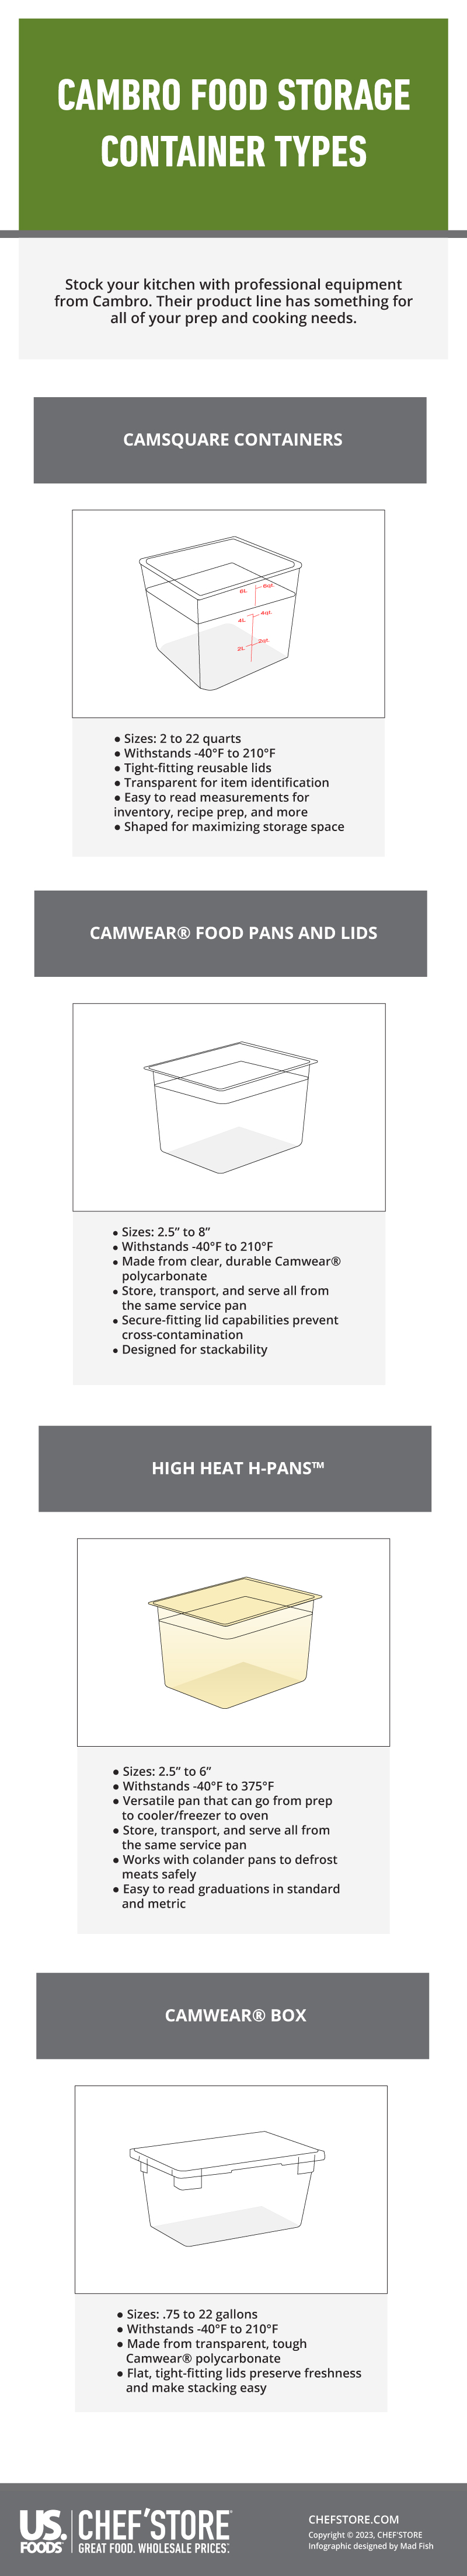 How to Maximize the Performance of Your Hot Boxes - the CAMBRO blog